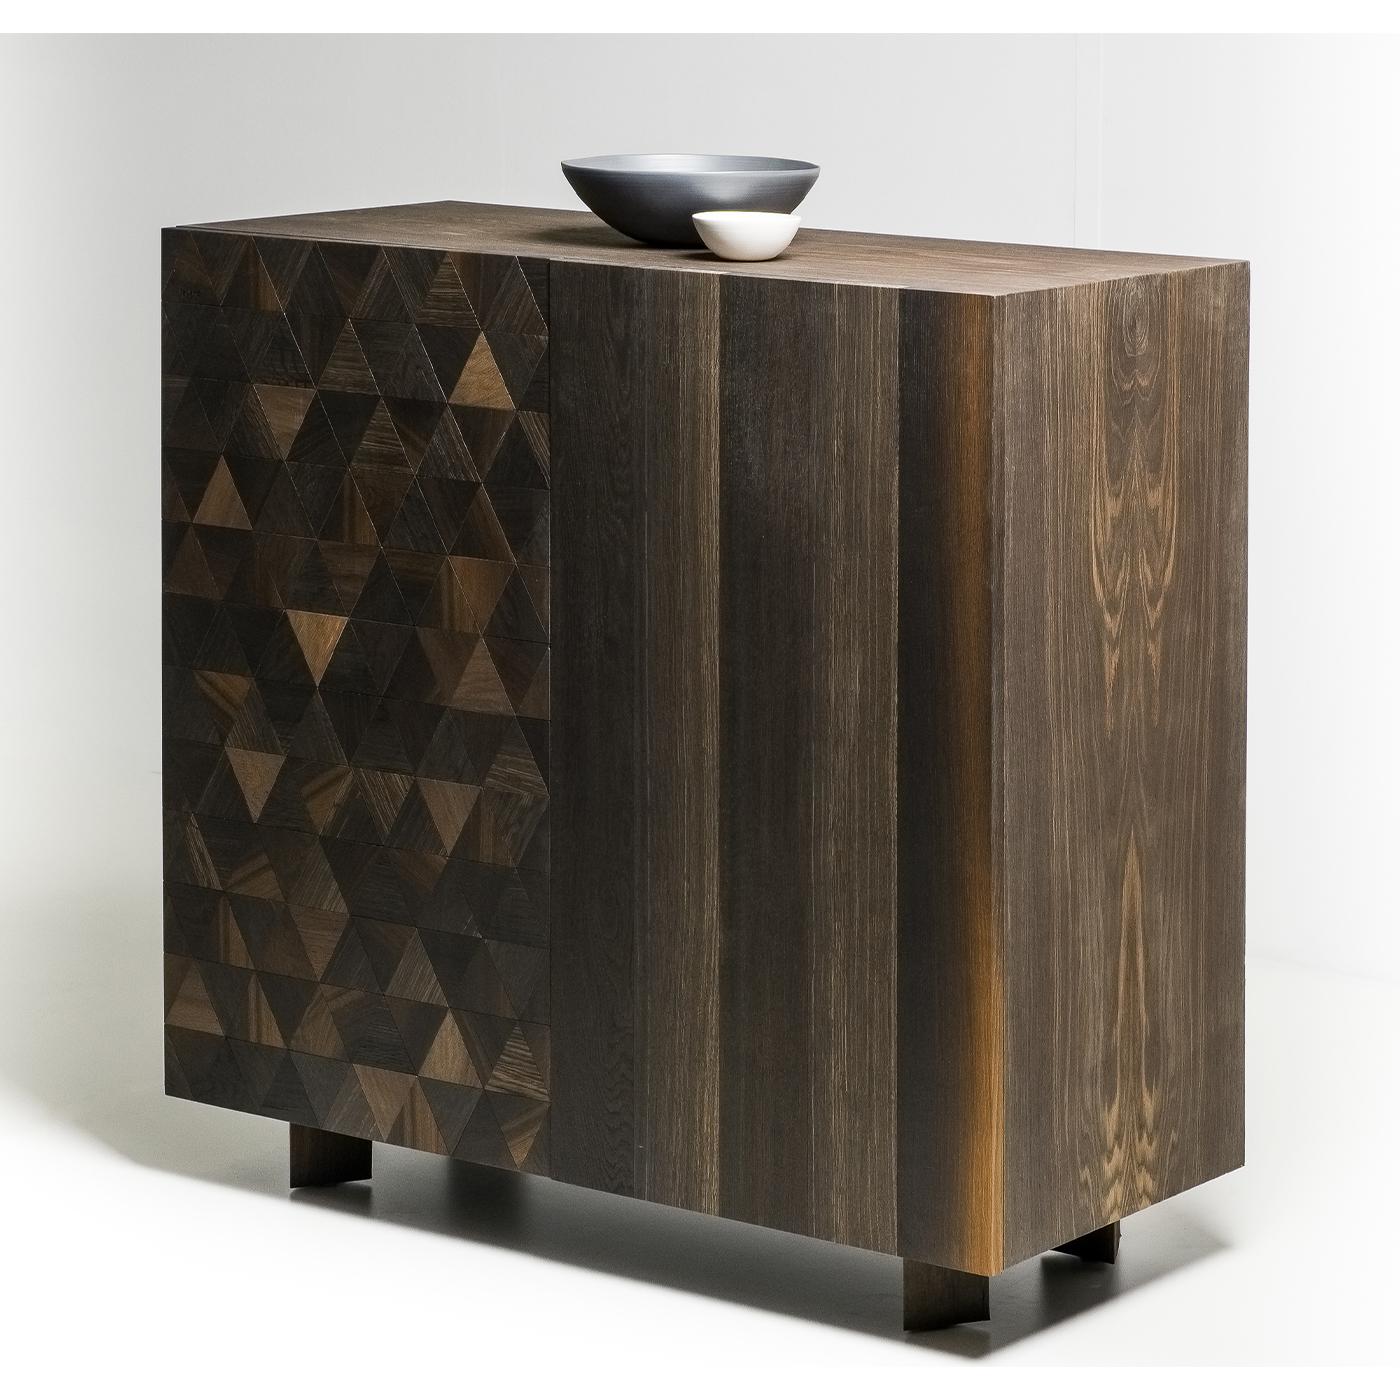 The structure and doors are made from Fossil Oak. The triangular feet reflect the same design and size as the triangular doors. The shelf is 1cm thick tempered glass. The finishing is water based oil with beeswax. Two distinct designs on the doors: